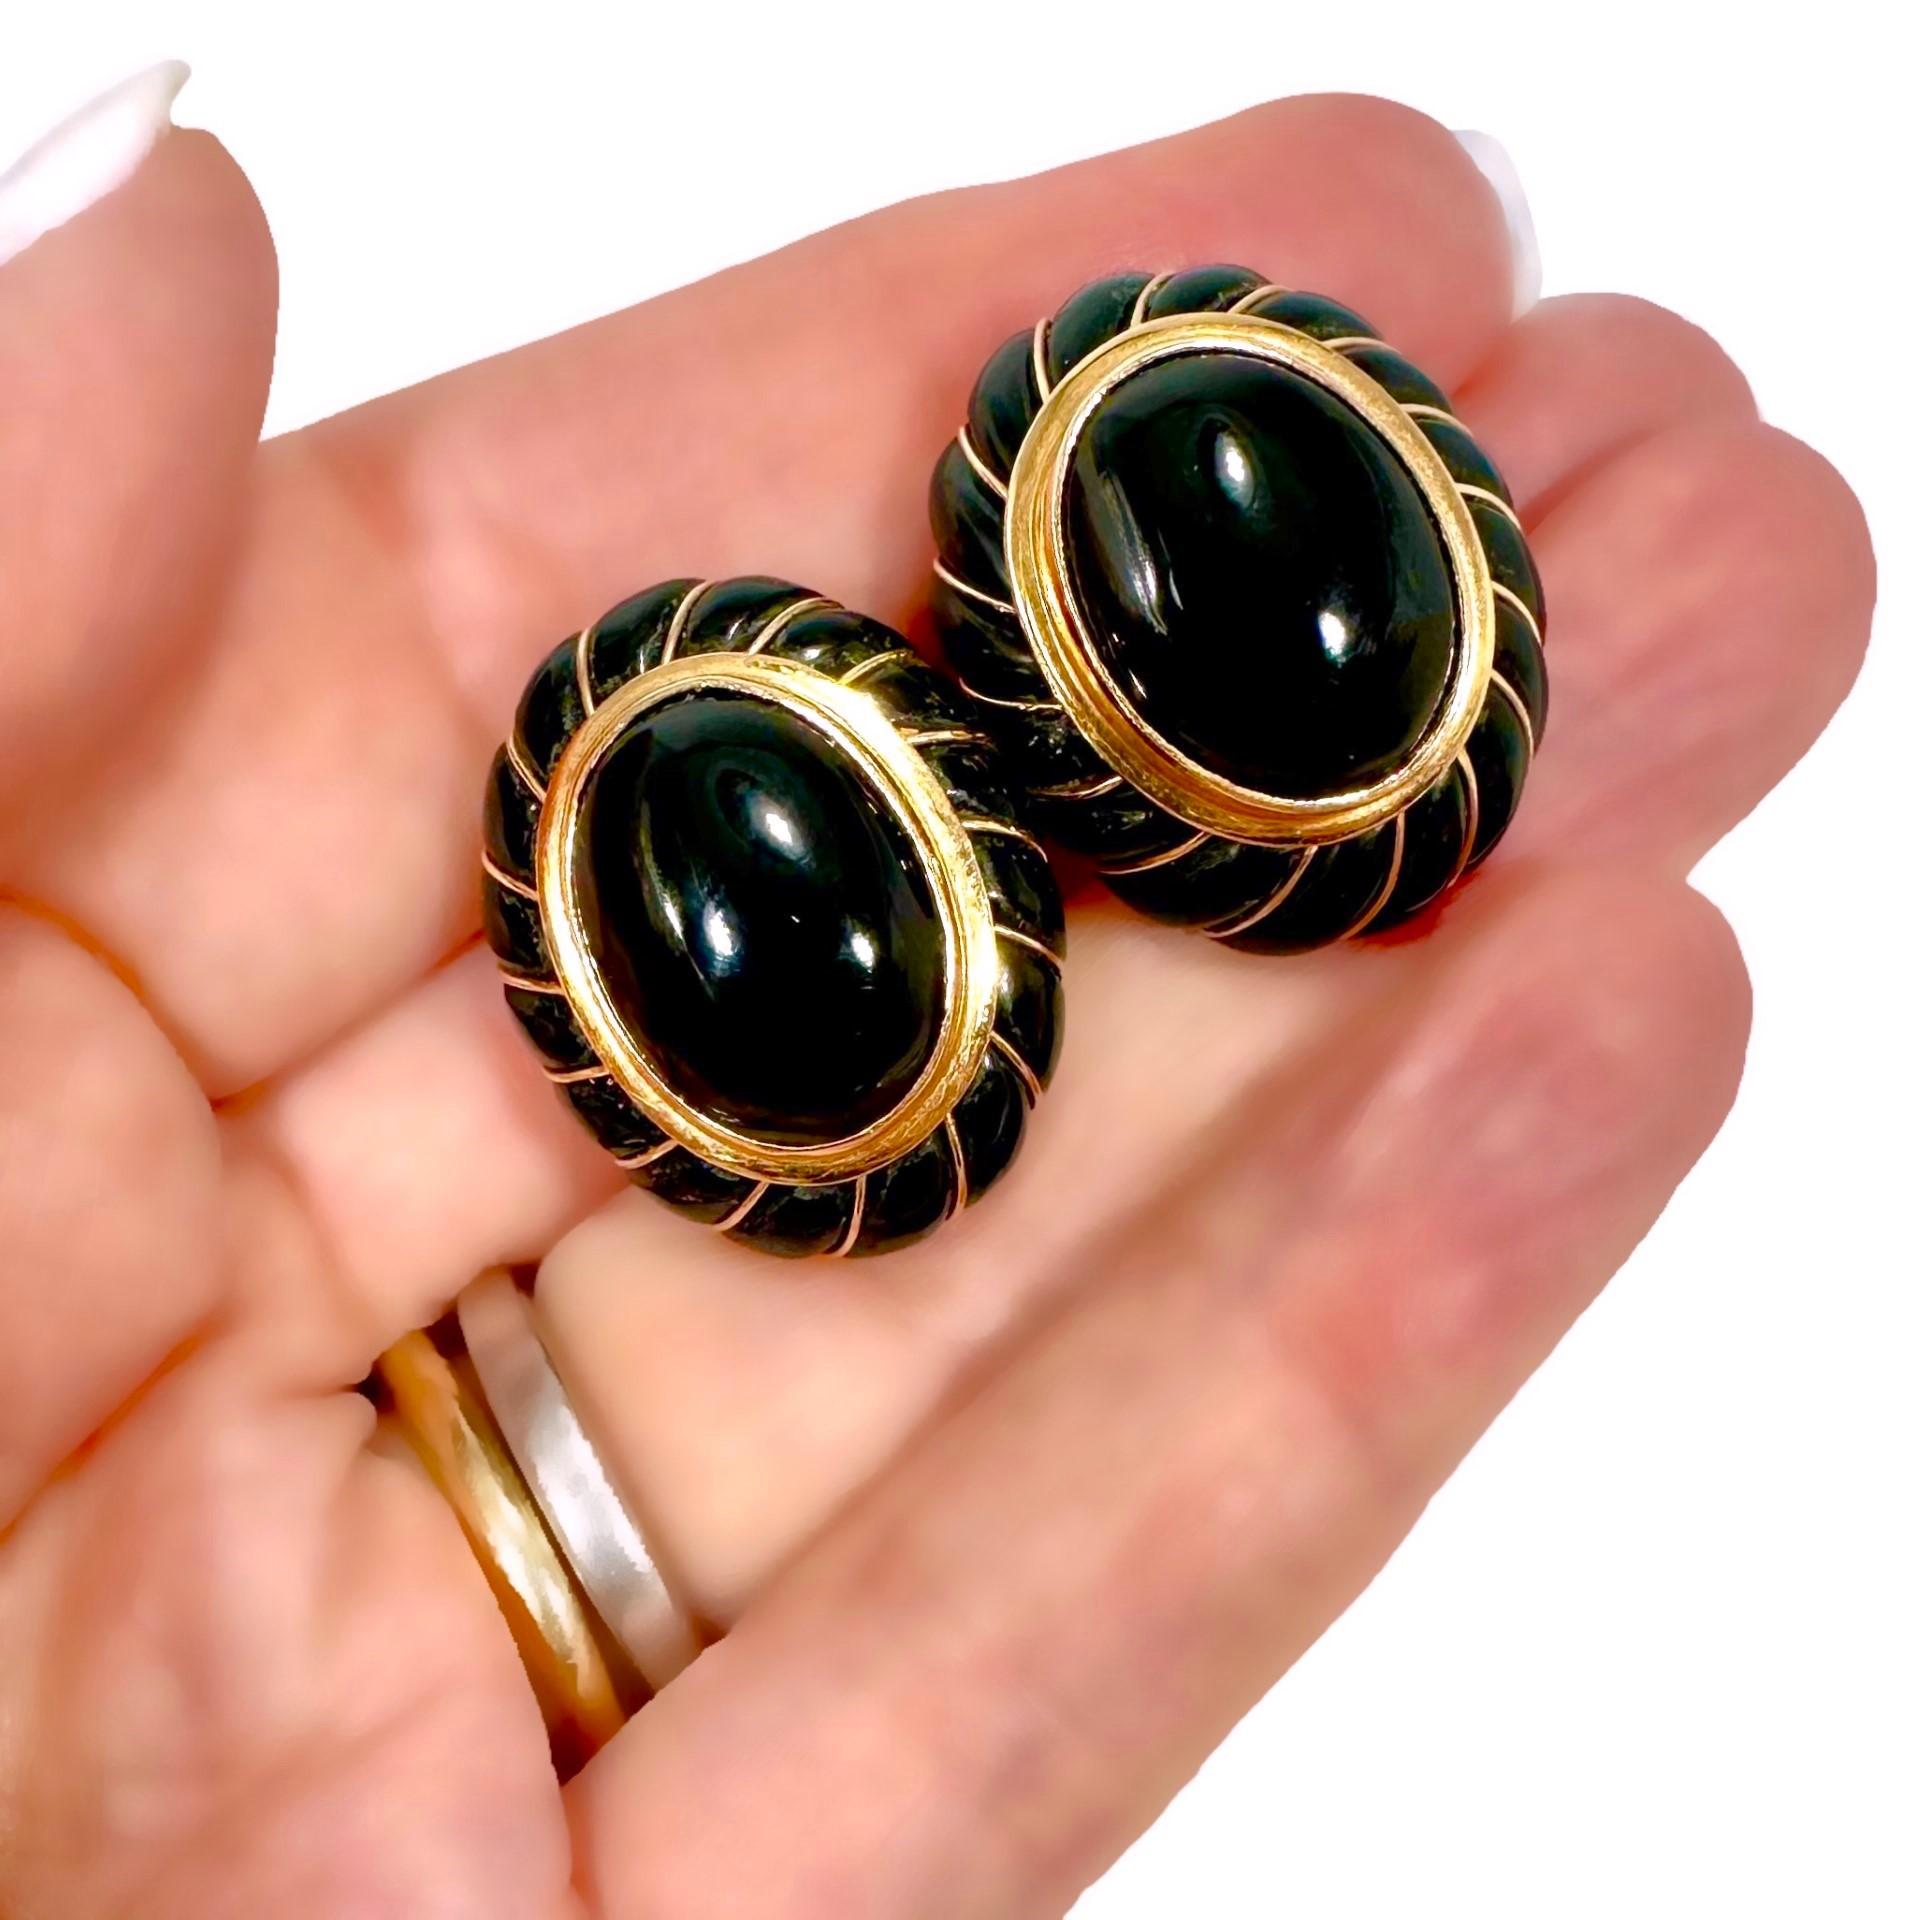 Women's Tailored, Vintage 14K Gold and Black Onyx Oval Shaped Earrings by Designer Maz